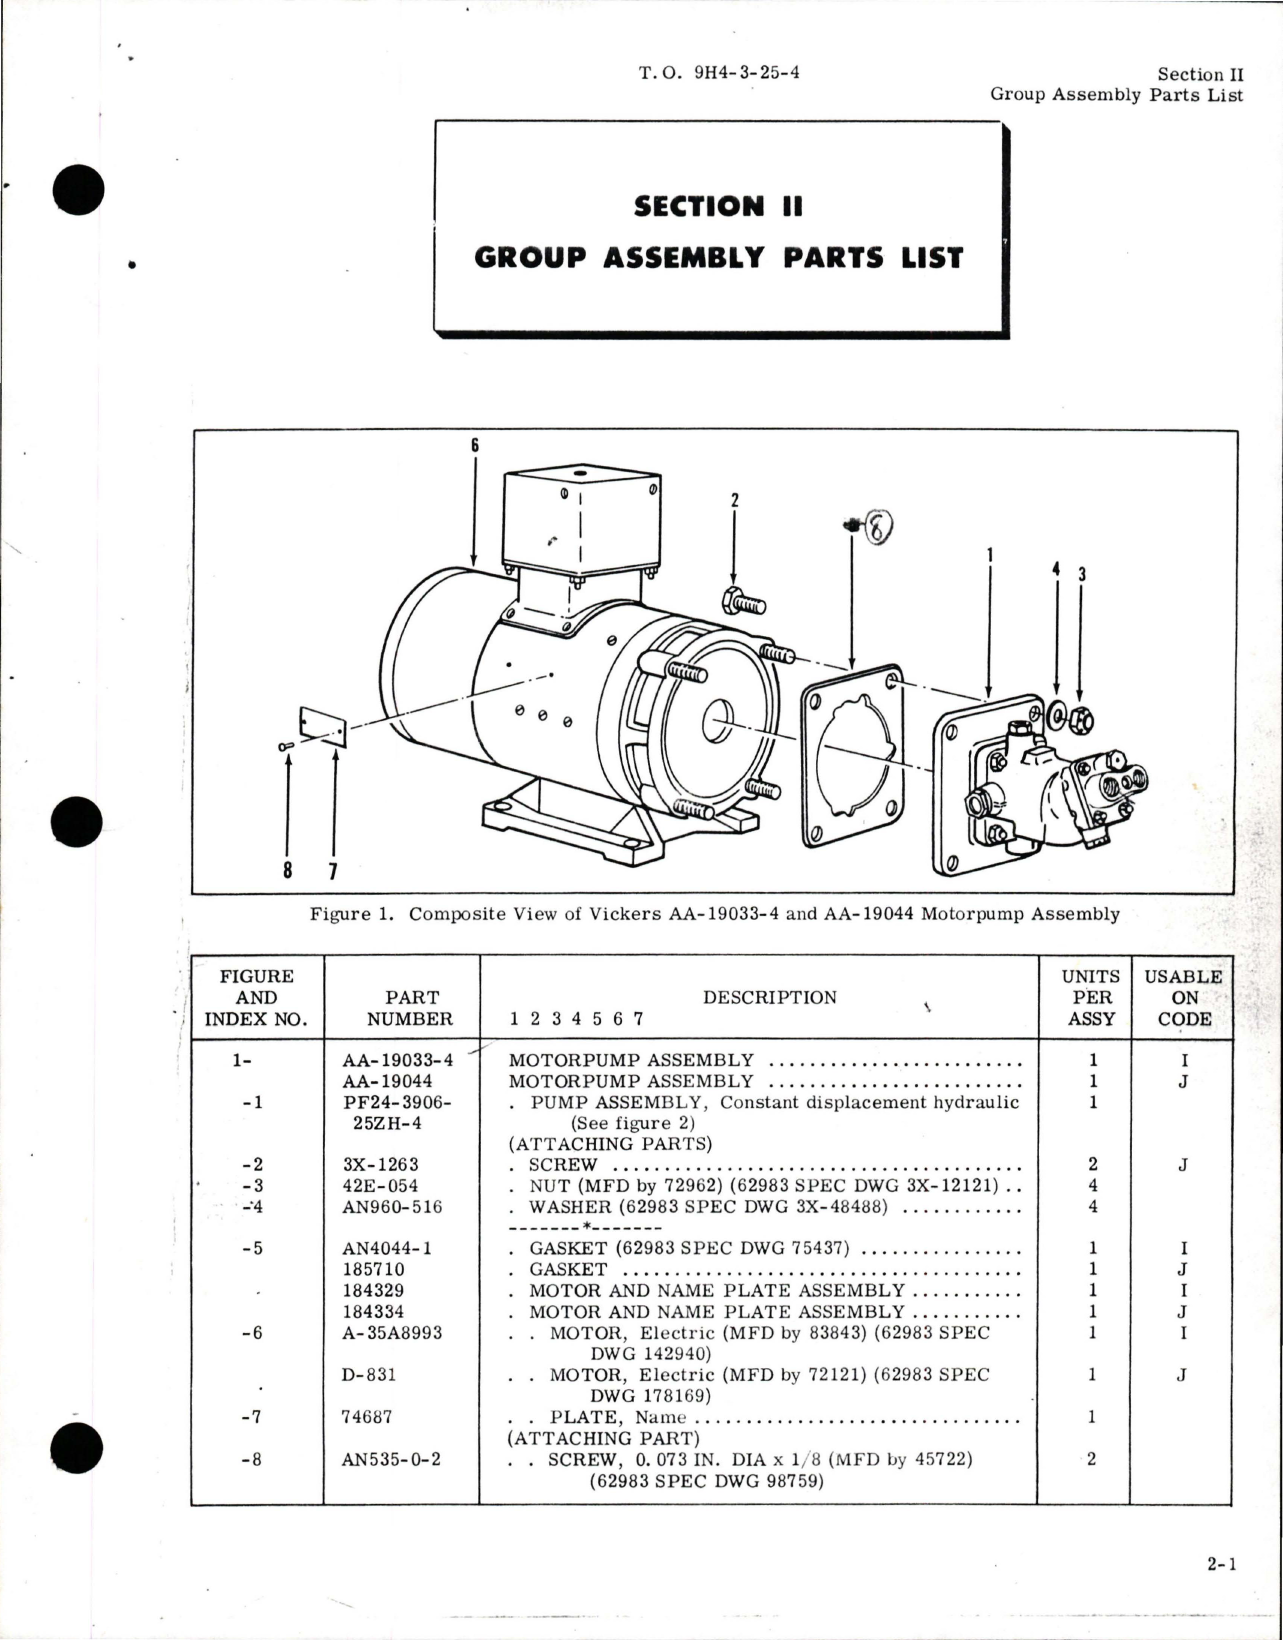 Sample page 7 from AirCorps Library document: Illustrated Parts Breakdown for Hydraulic Pump Assembly - PF-3906-4 Series